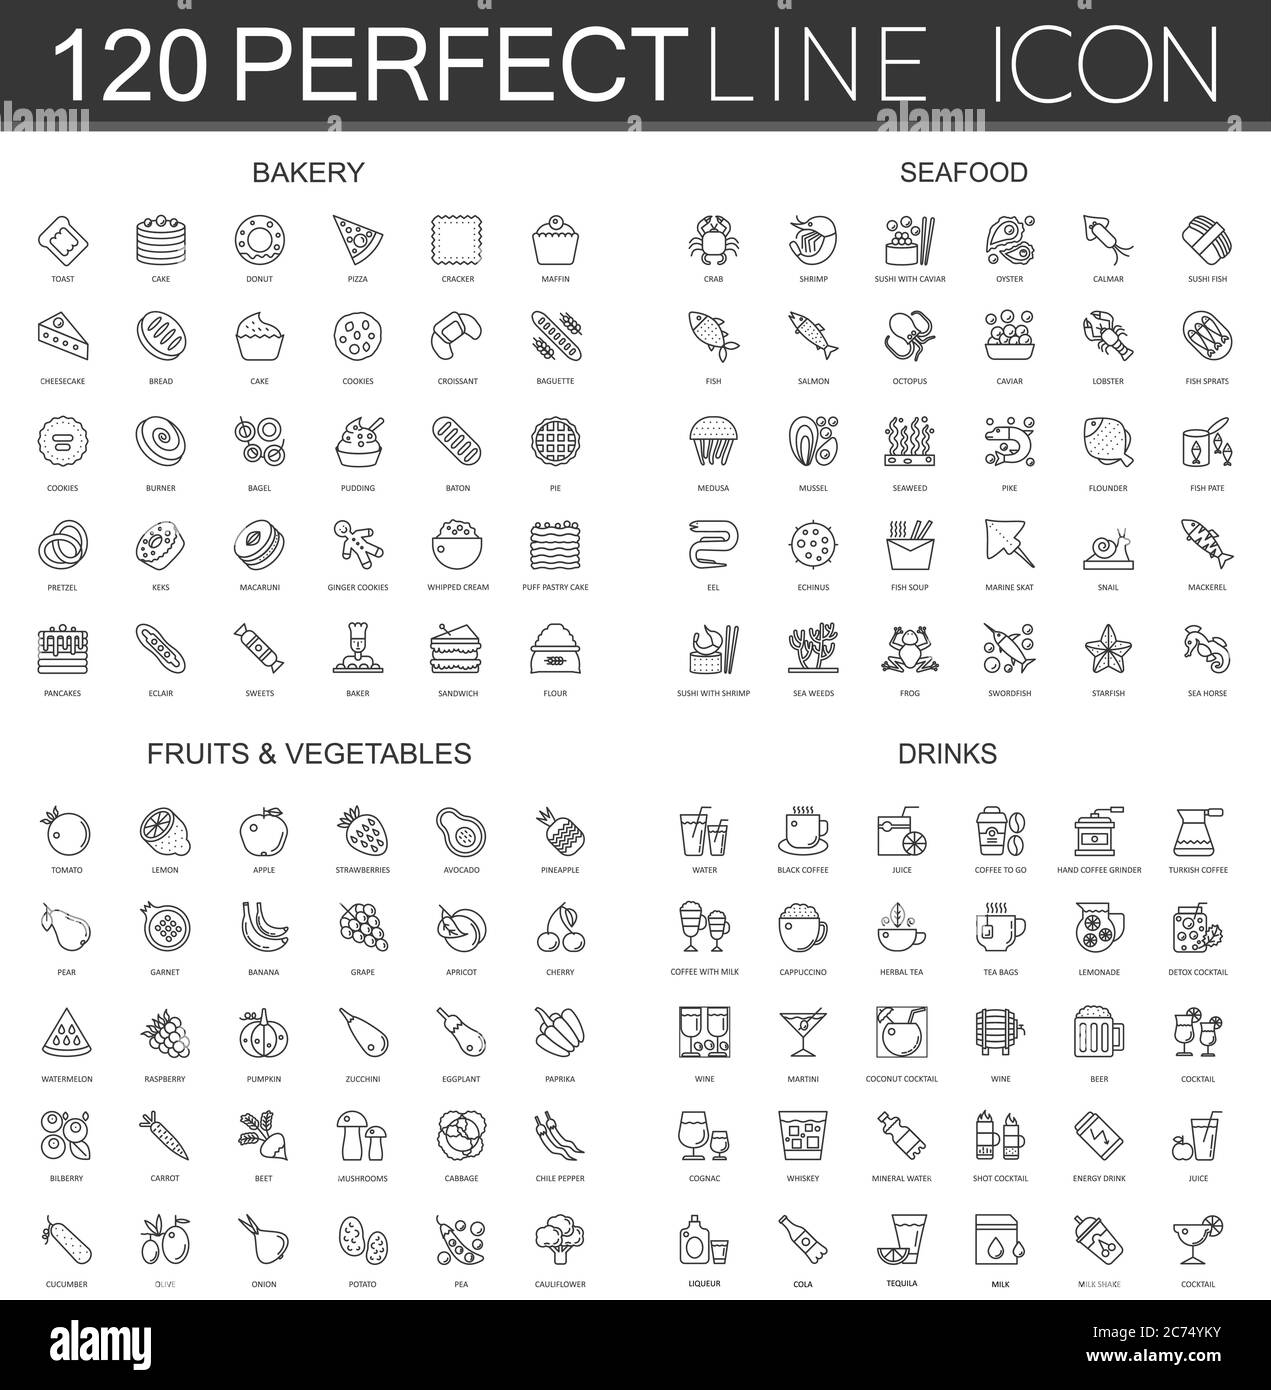 120 modern thin line icons set of bakery, seafood, fruits and vegetables, drinks isolated. Stock Vector